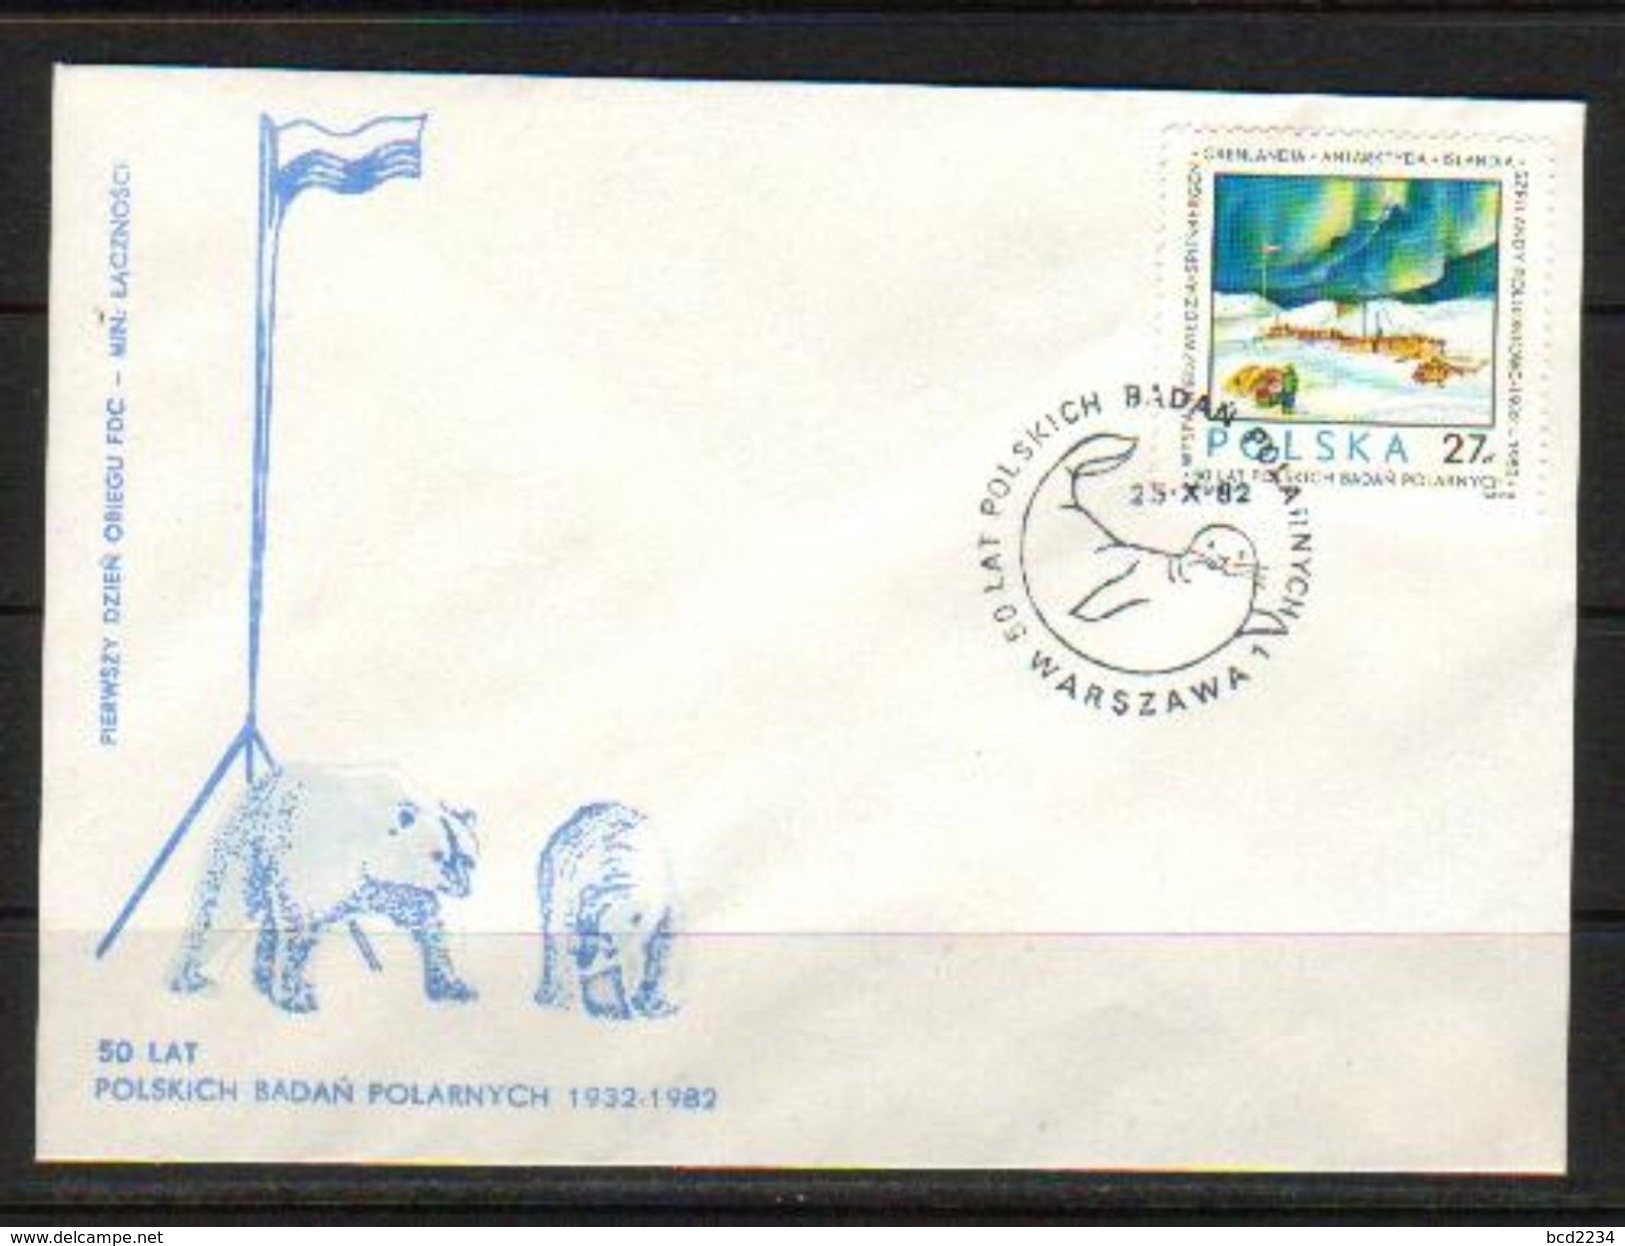 POLAND FDC 1982 50TH ANNIVERSARY POLISH POLAR RESEARCH EXPEDITIONS ANTARCTIC BEAR HELICOPTER SPITZBERGEN - Research Programs